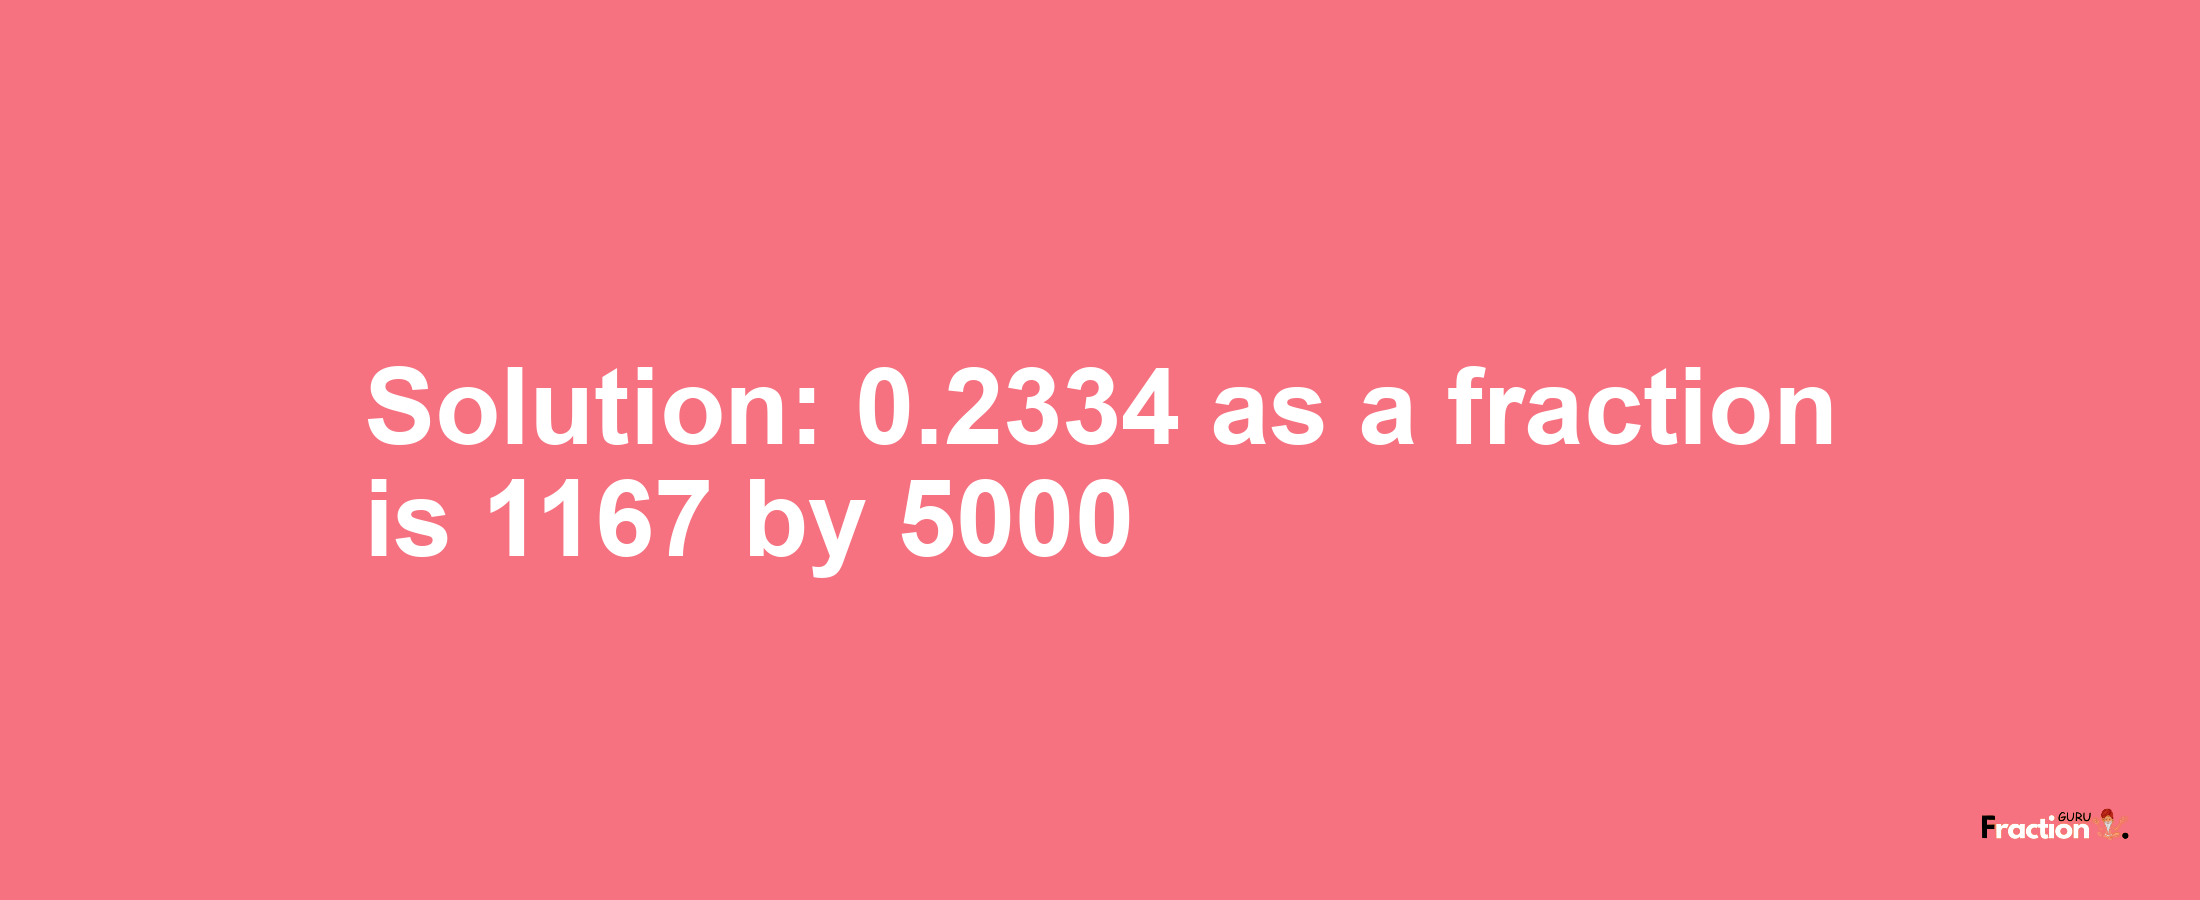 Solution:0.2334 as a fraction is 1167/5000